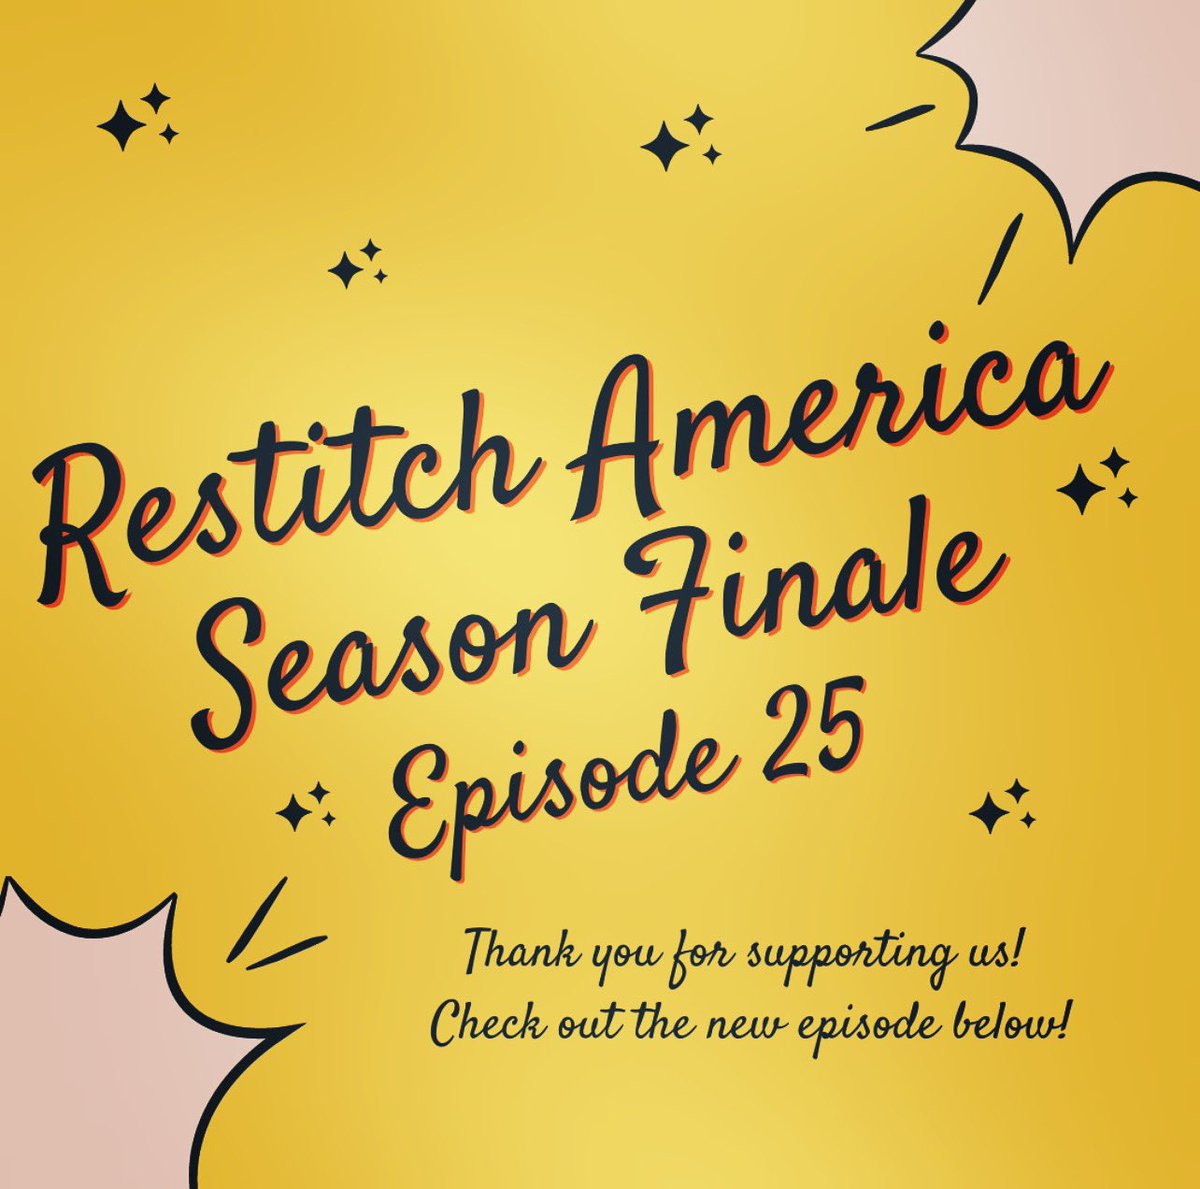 Six months already! Check out our finale episode where we highlight some of our favorite moments with guests throughout the past few months. youtu.be/3cx601jMmj4 Thank you to @RUOKPage @growingtotruth @RomanianInUSA @Party_of_Logic